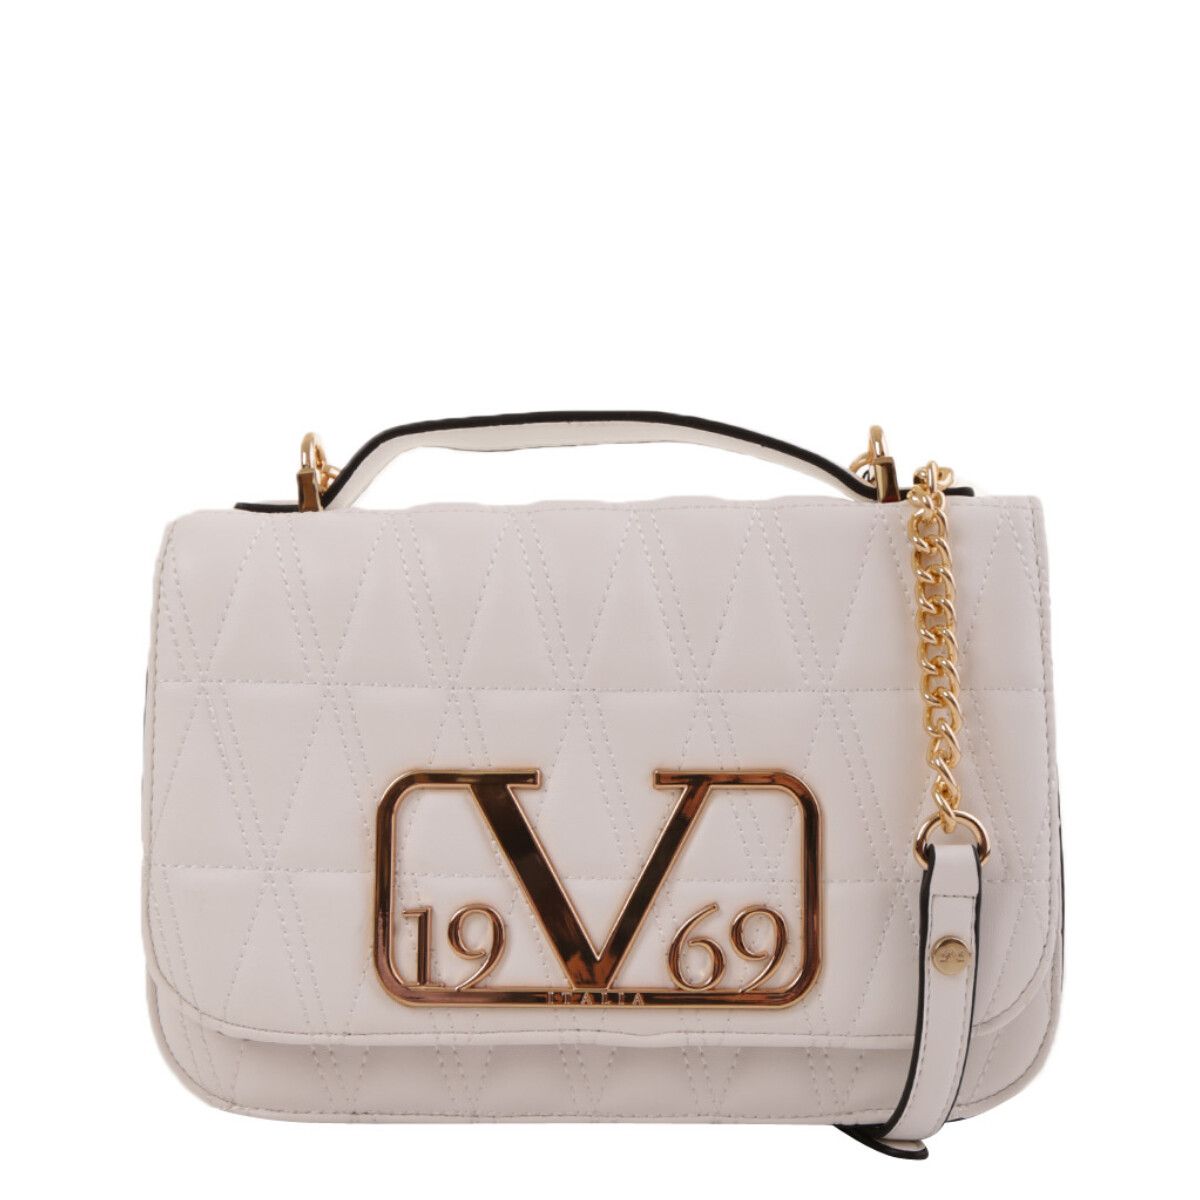 Brand: 19v69 Italia Gender: Women Type: Bags Season: Fall/Winter PRODUCT DETAIL • Color: white • Fastening: magnet • Pockets: inside pockets • Size (cm): 17x25x8 • Details: -handbag -with shoulder strap • Article code: VI20AI0026 COMPOSITION AND MATERIAL • Composition: -100% leather. material:leather. type:clutch. occasion:everyday. gender:womens. pattern:plain